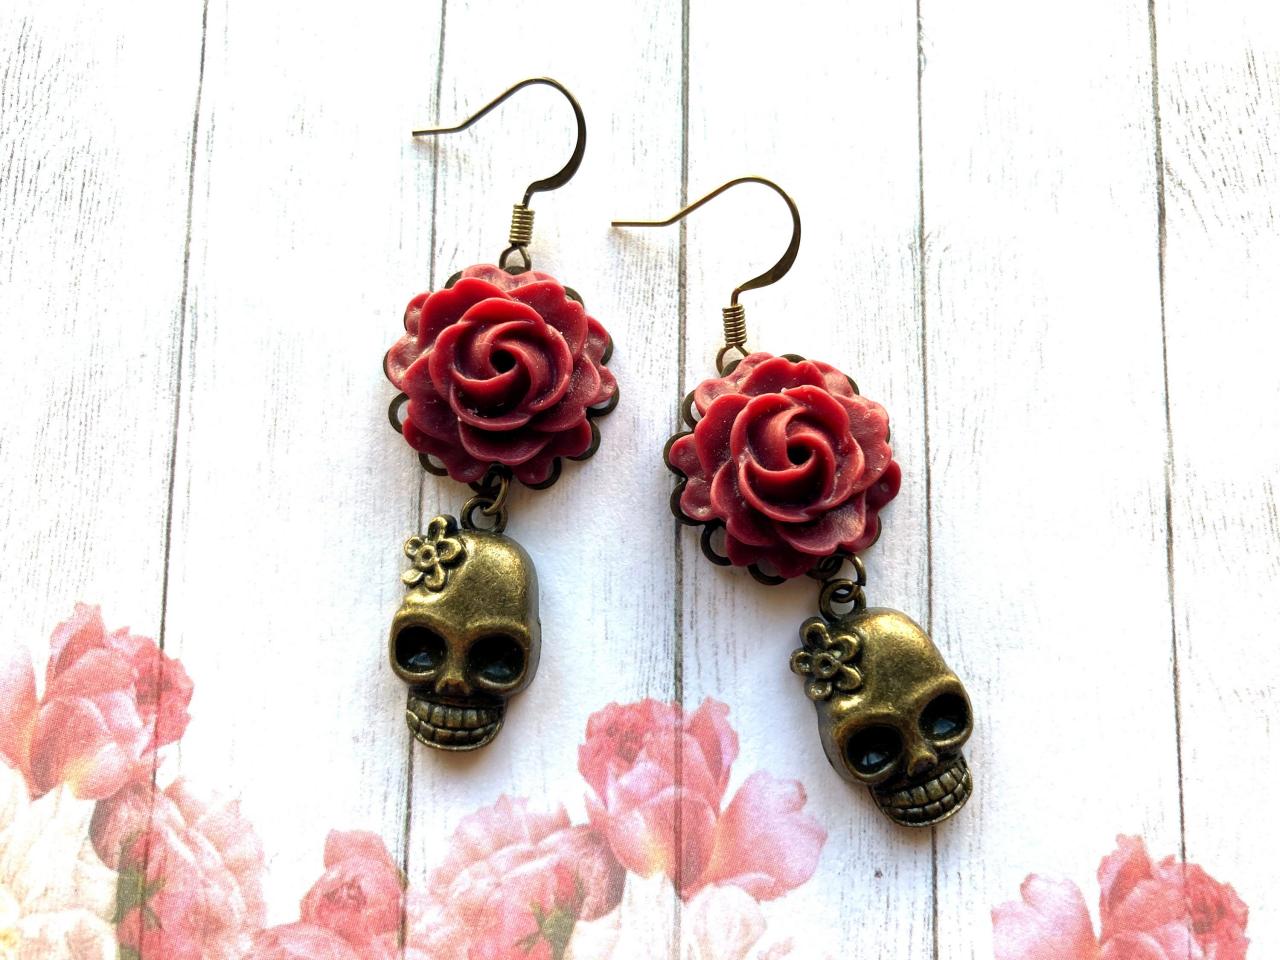 Skull Earrings With Red Rose Pendants, Day Of The Dead Jewelry, Selma Dreams